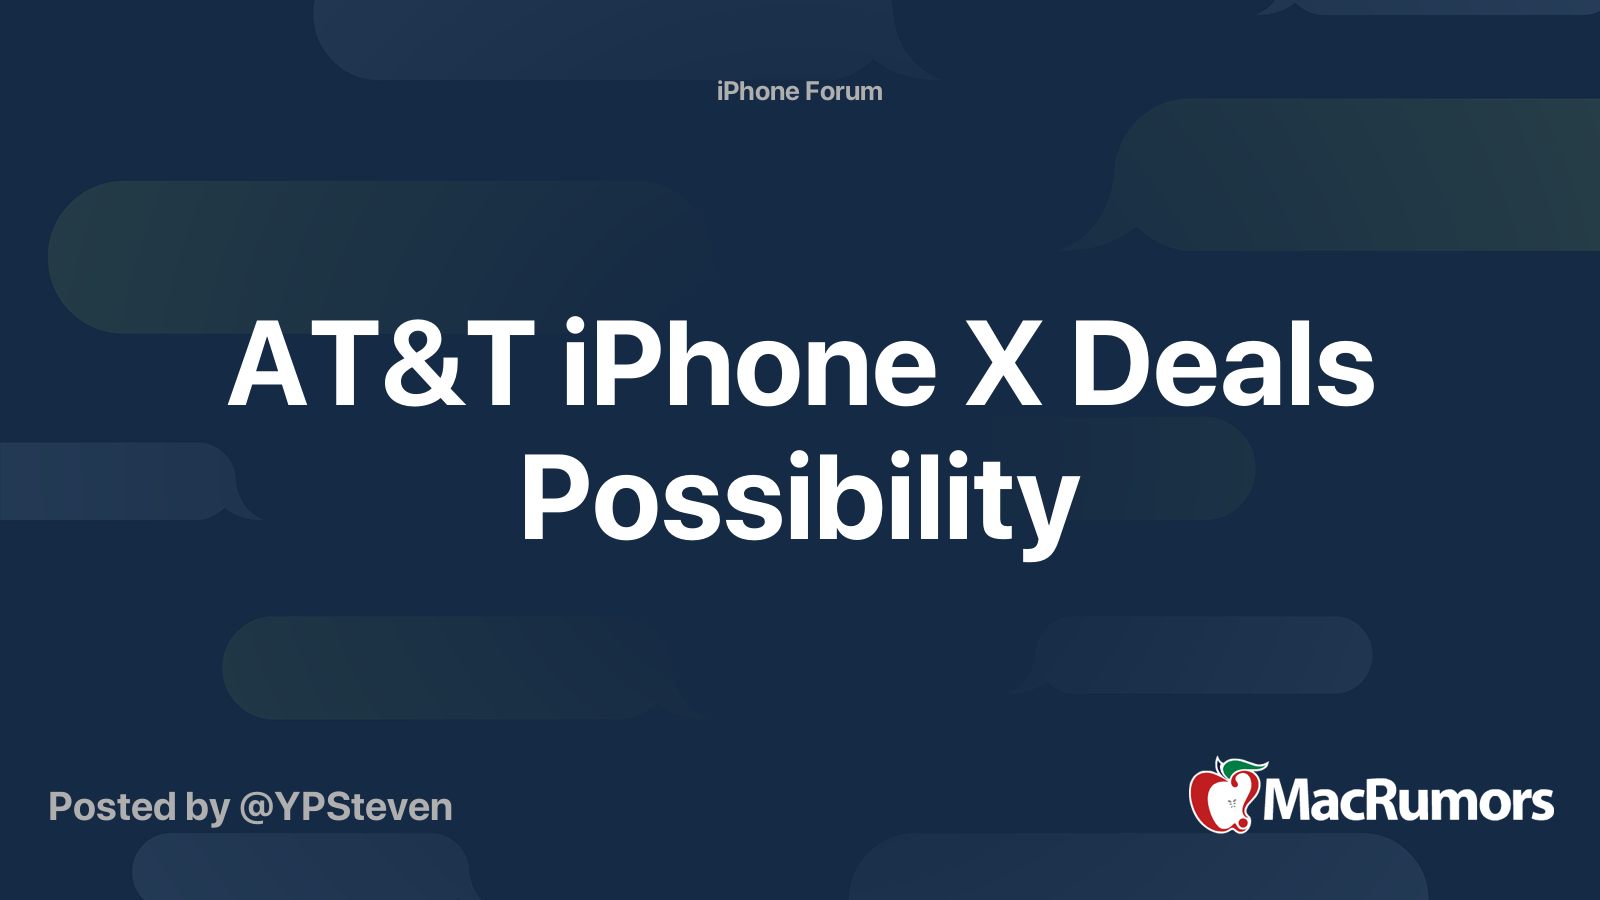 at-t-iphone-x-deals-possibility-macrumors-forums